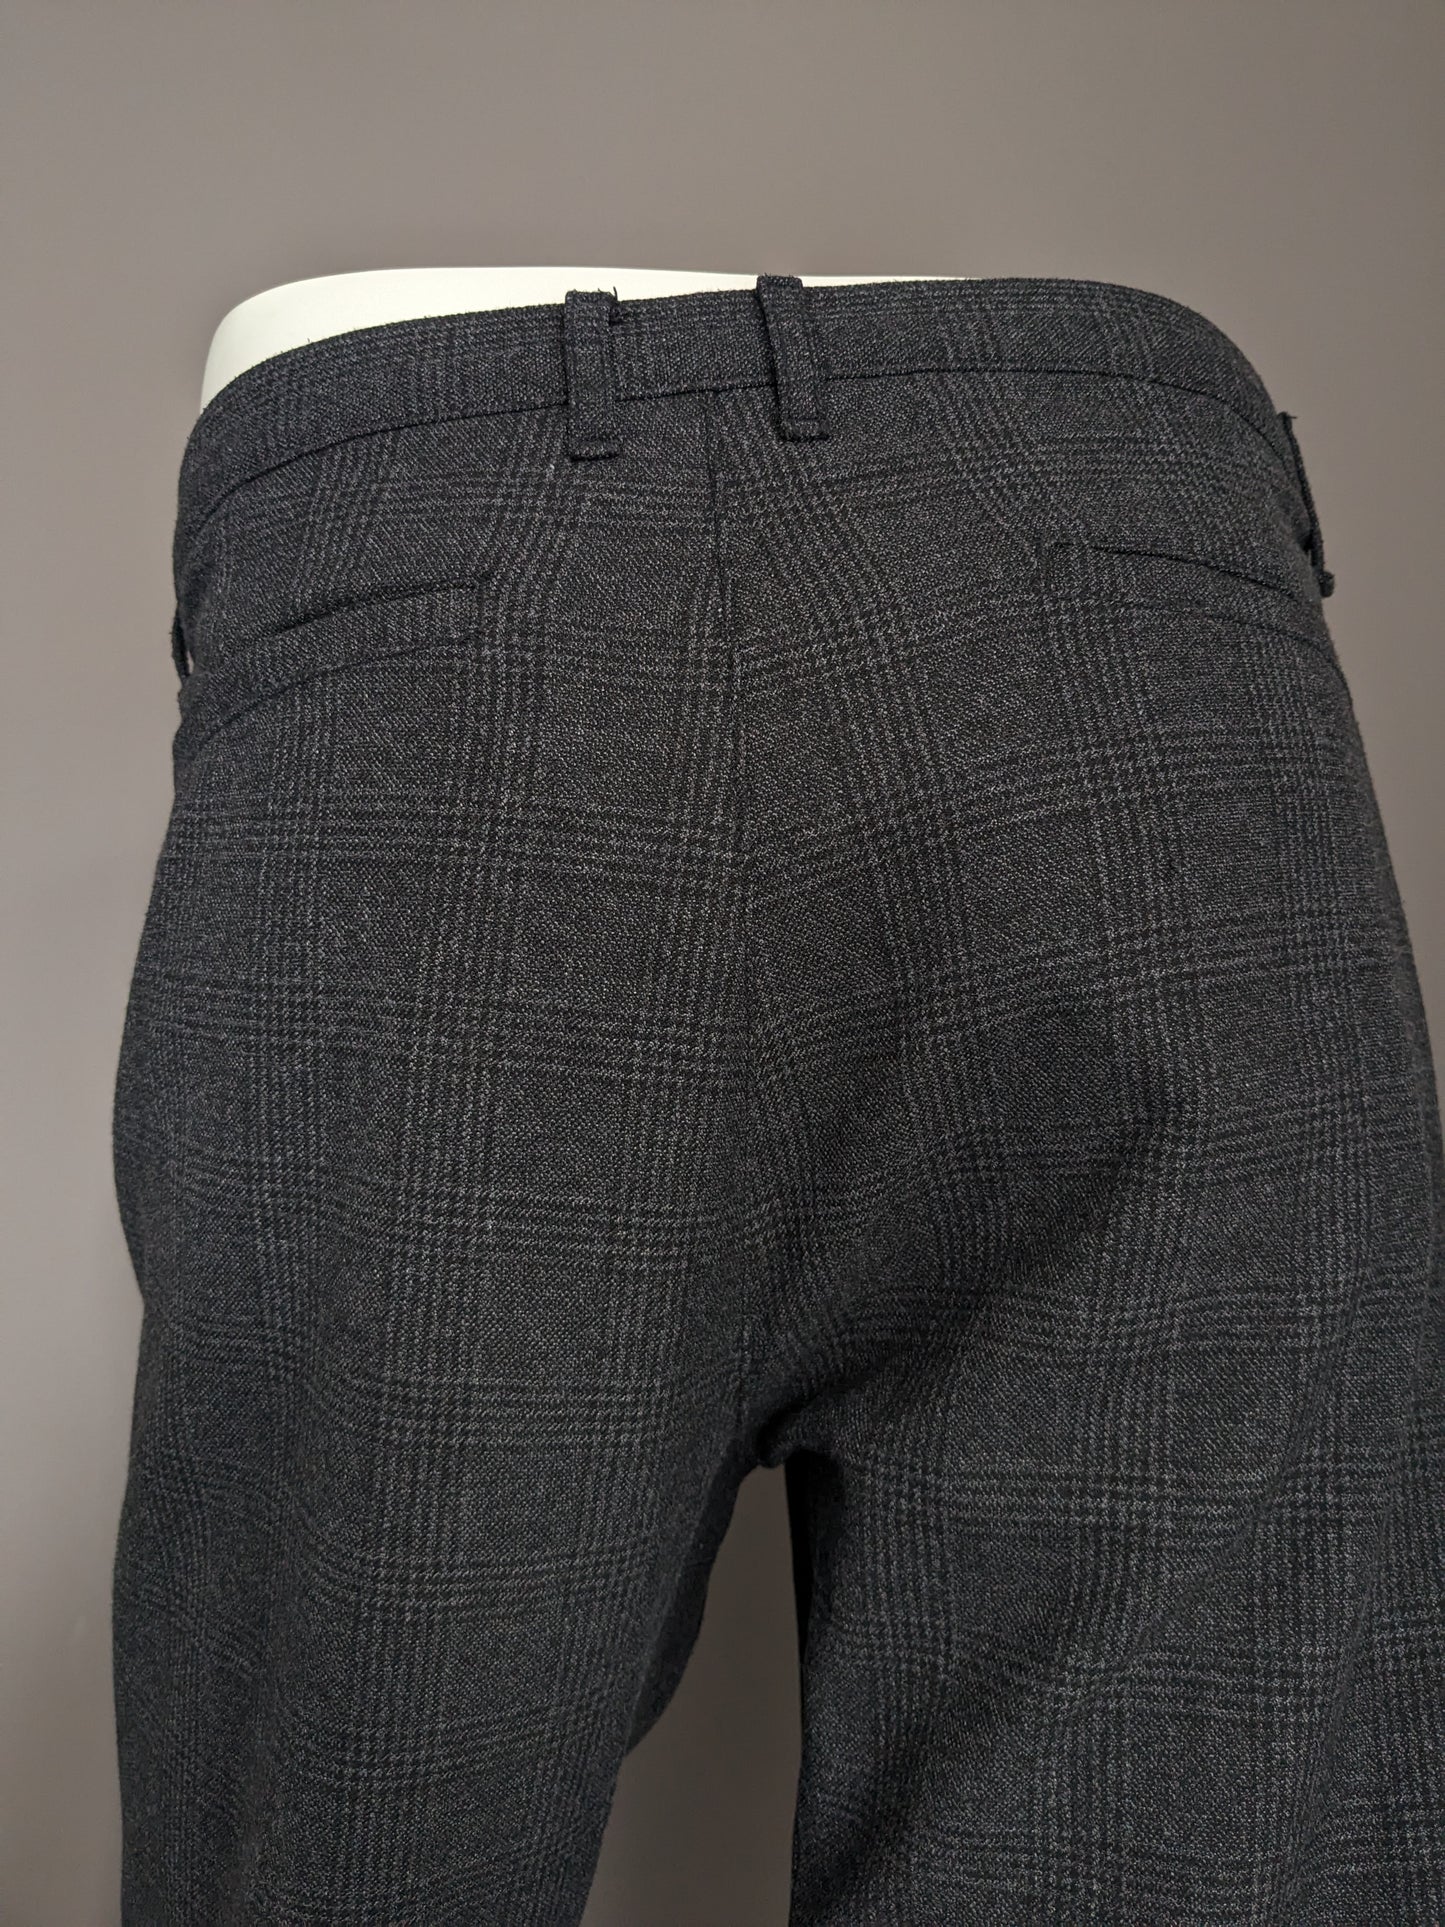 LCW Vision trousers / pants. Gray black checked. Cropped Slim Fit. W36 - L30.